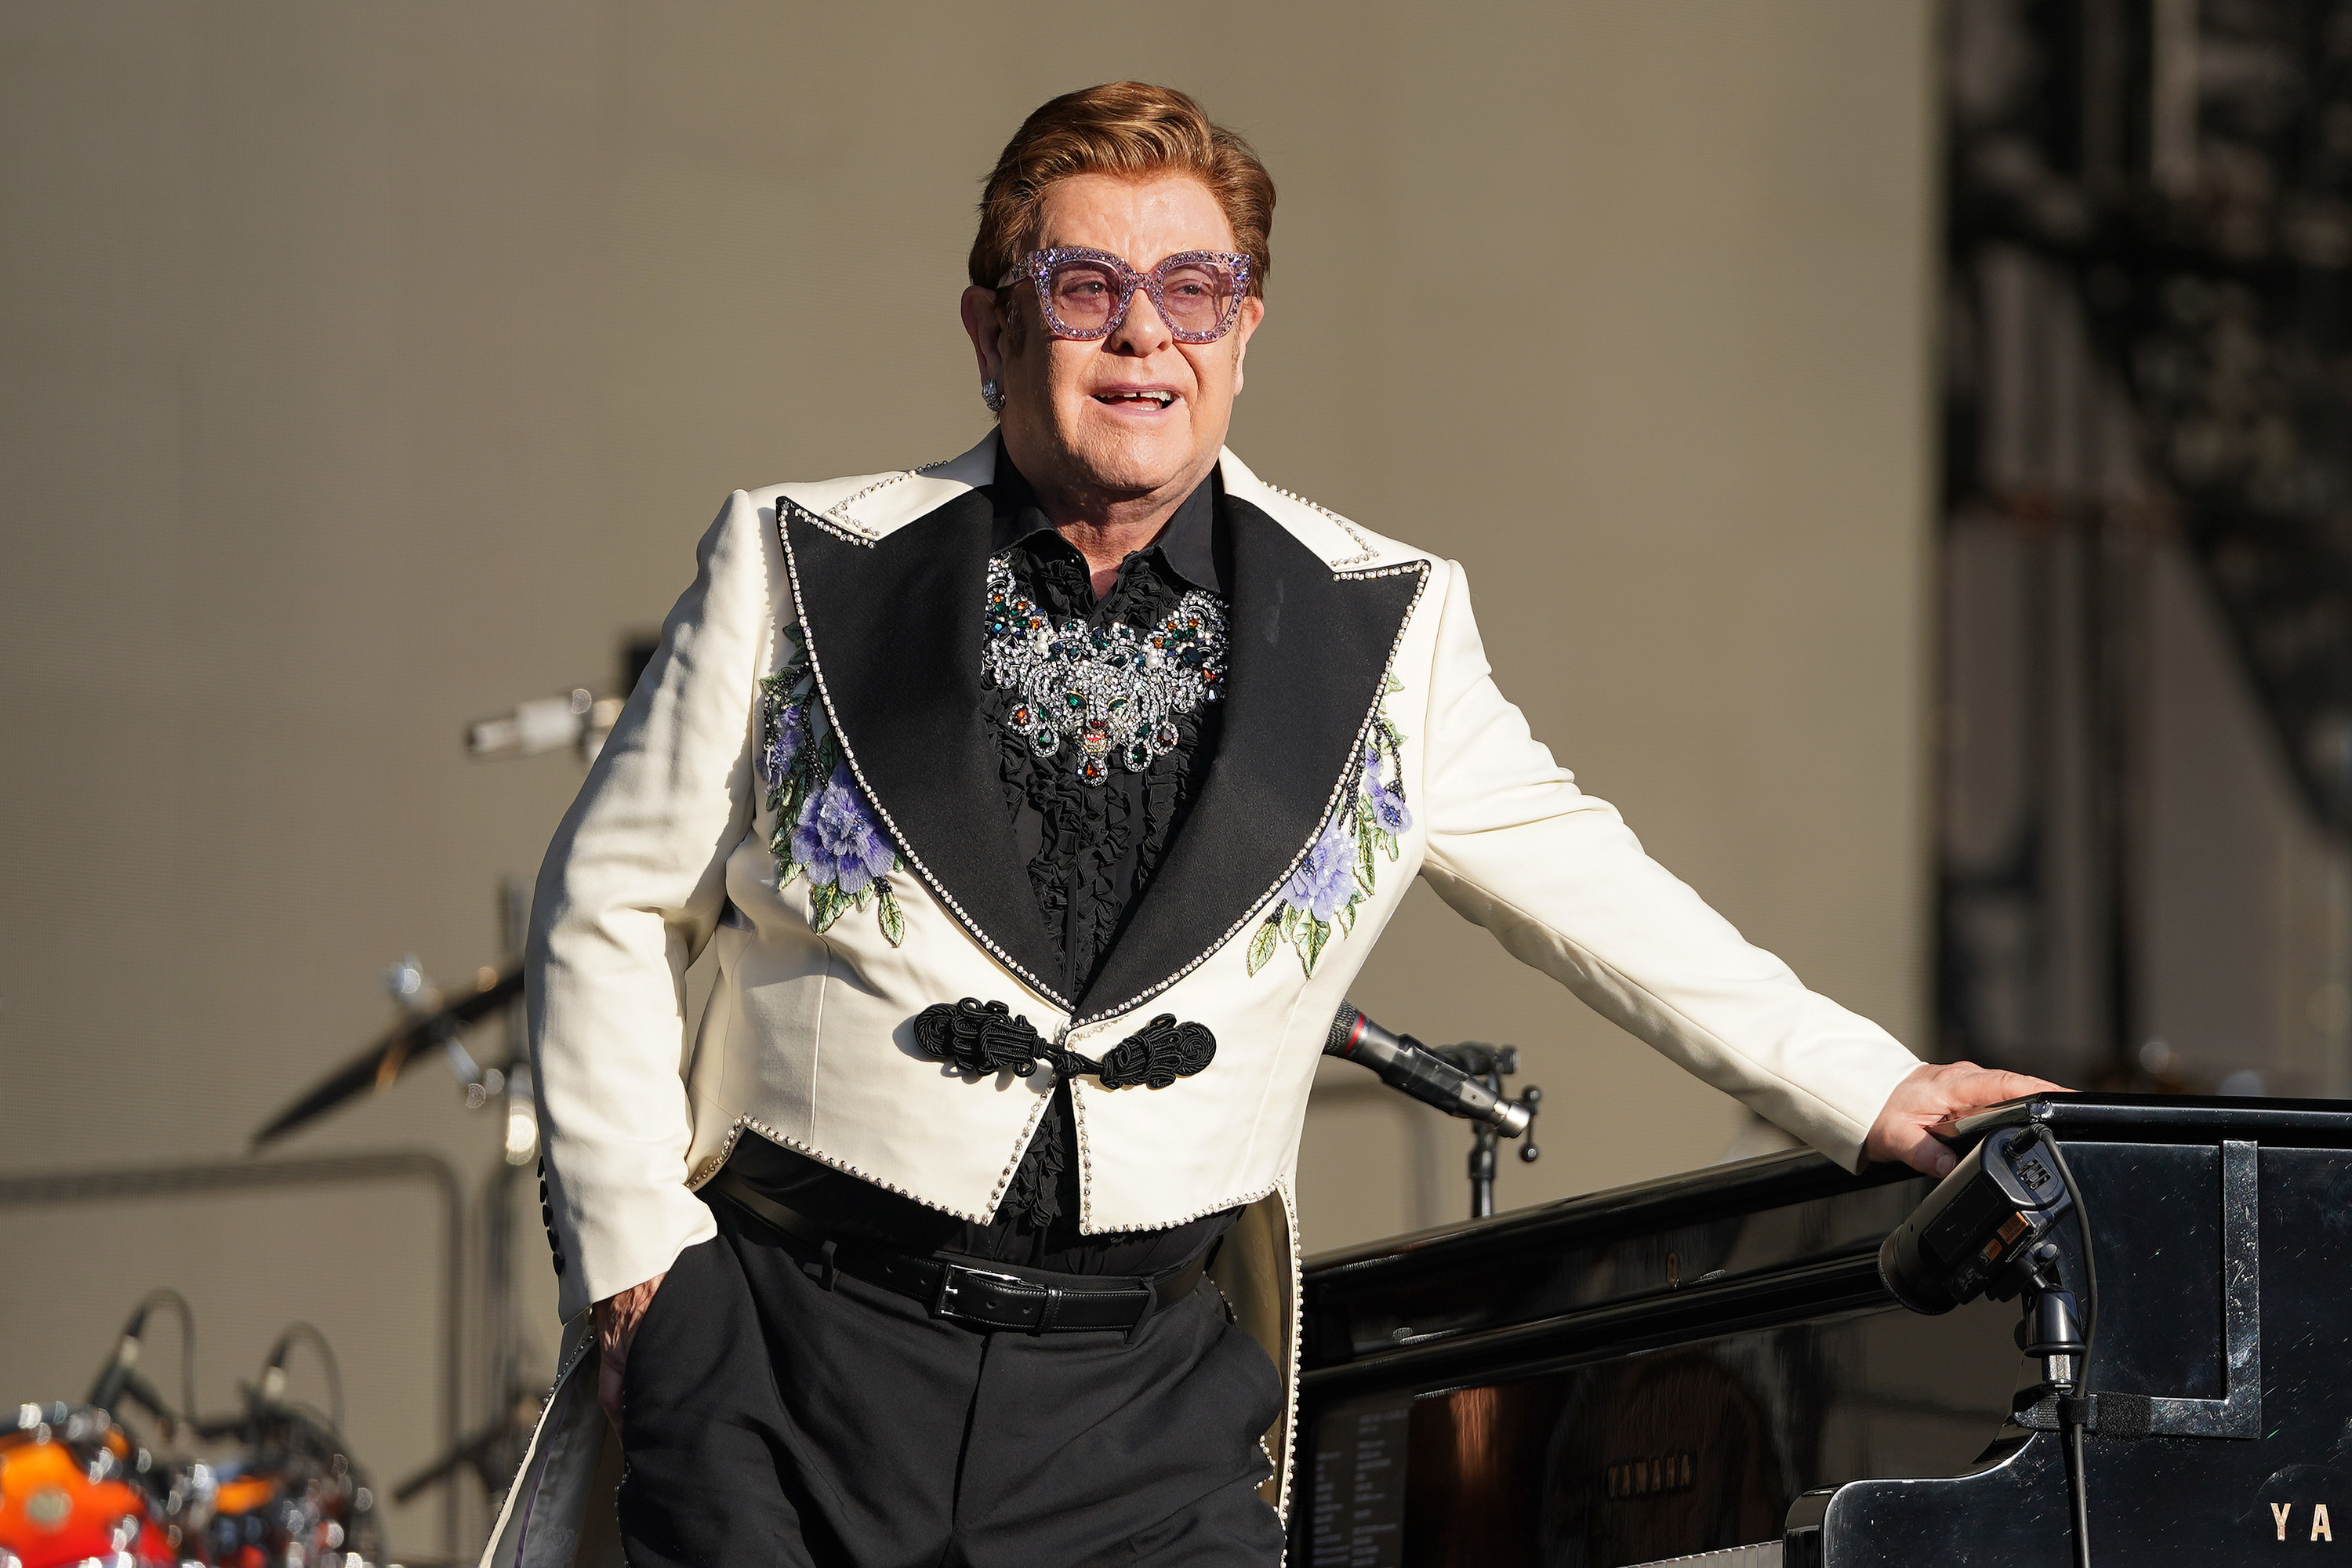 Elton leans on his piano and smiles